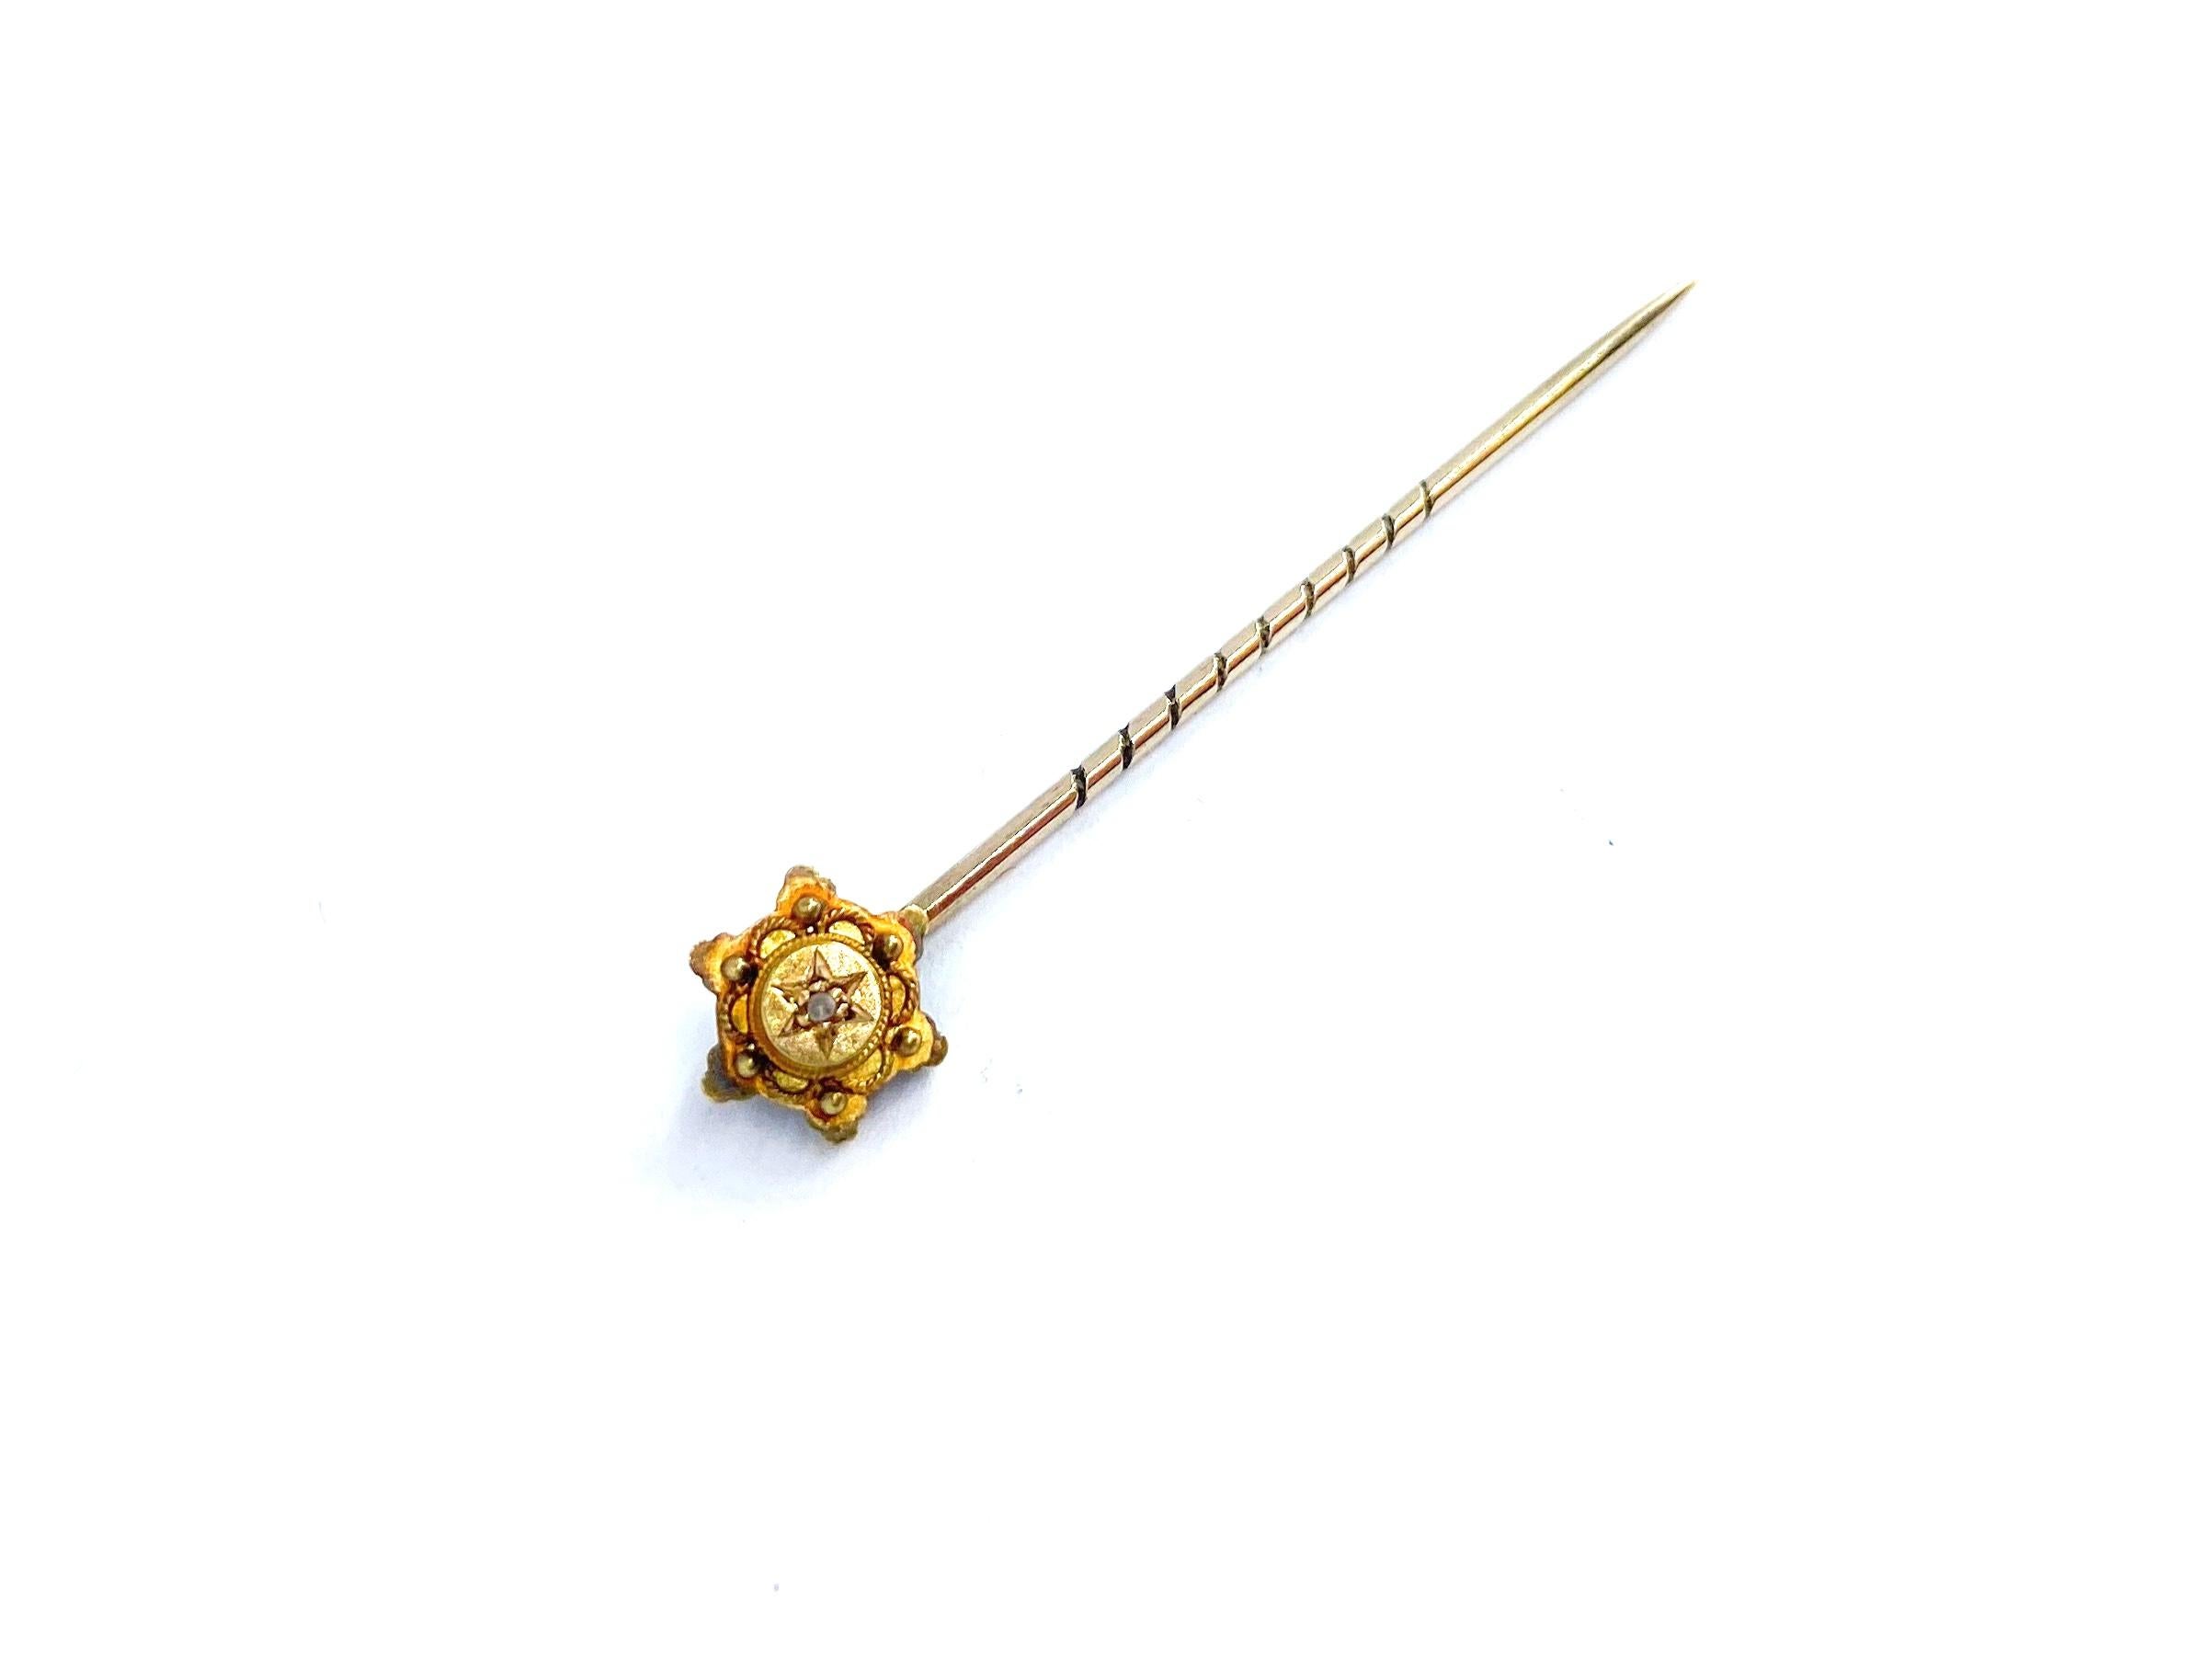 Stickpin star
Stick Pin
I don't know what the gold content is
Tie pin Gold and one small rose cut diamond.
Behind Stamp 5C? and Stripped number.